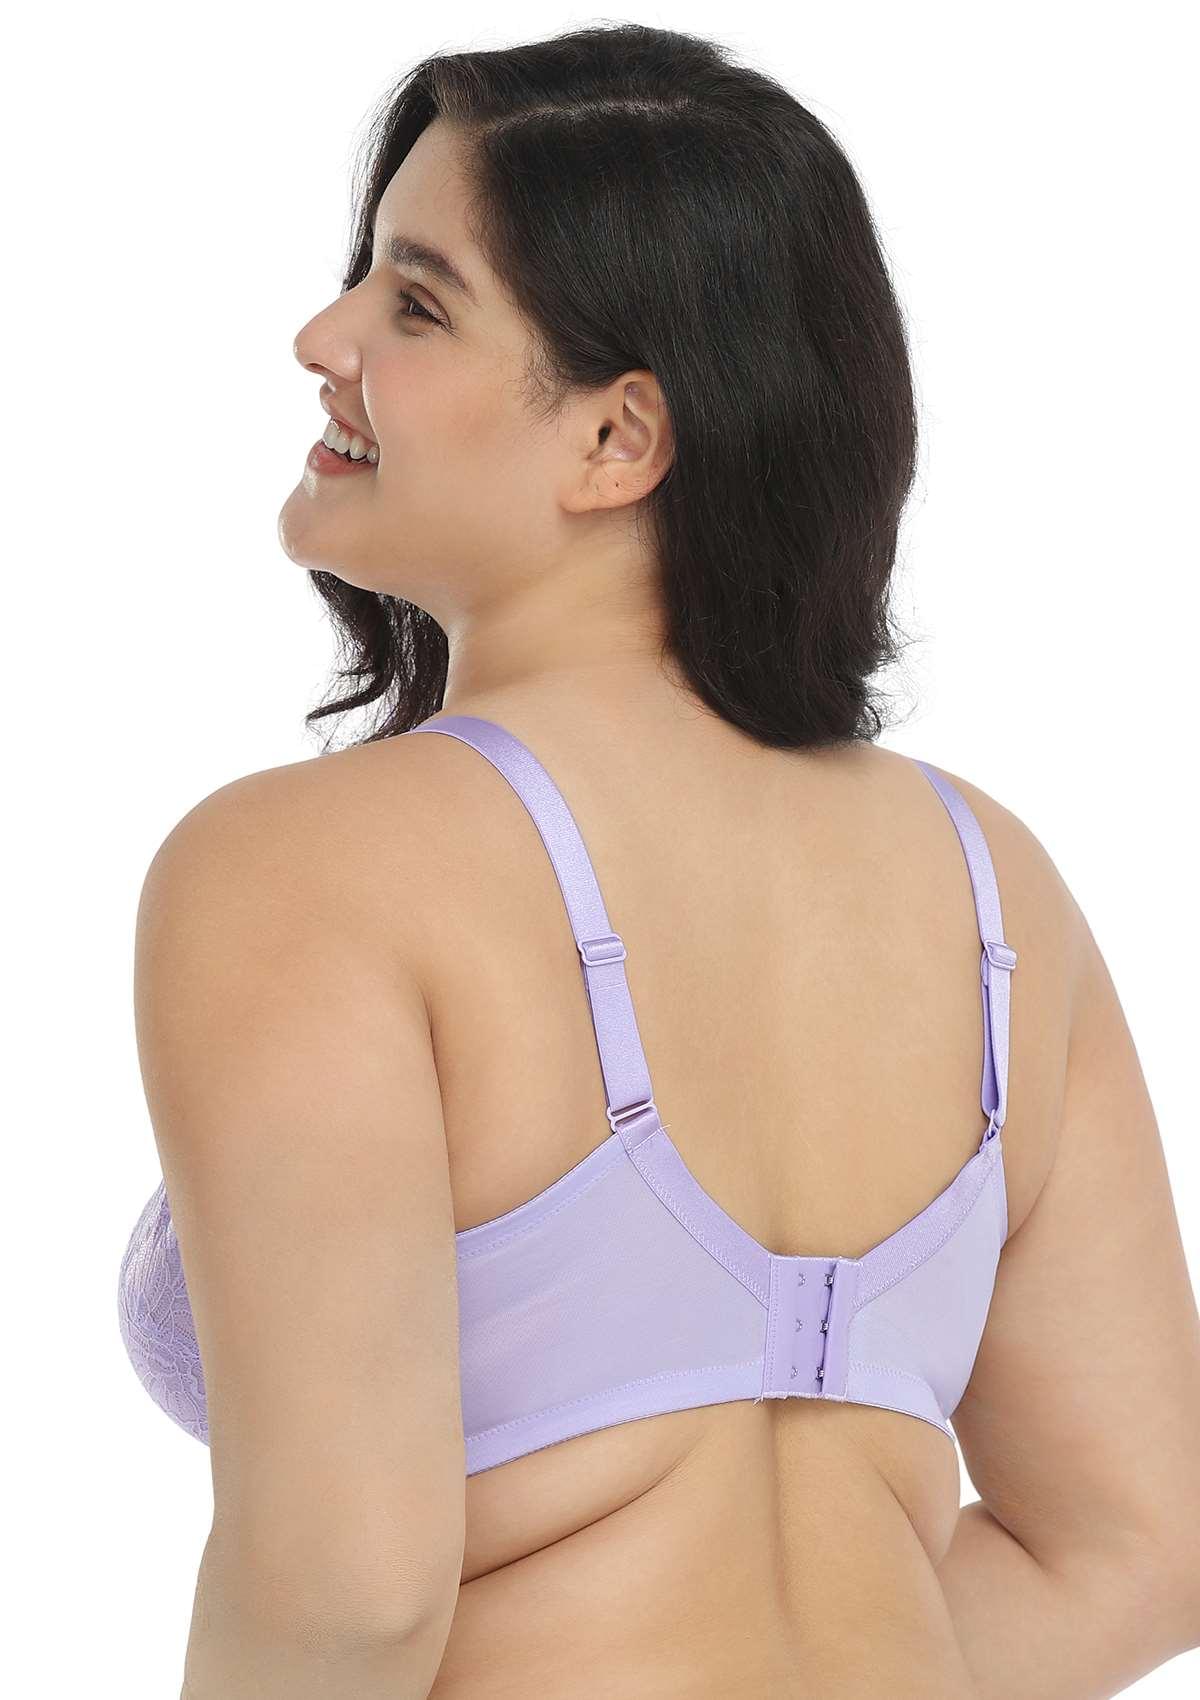 HSIA Blossom Transparent Lace Bra: Plus Size Wired Back Smoothing Bra - Light Purple / 36 / DD/E